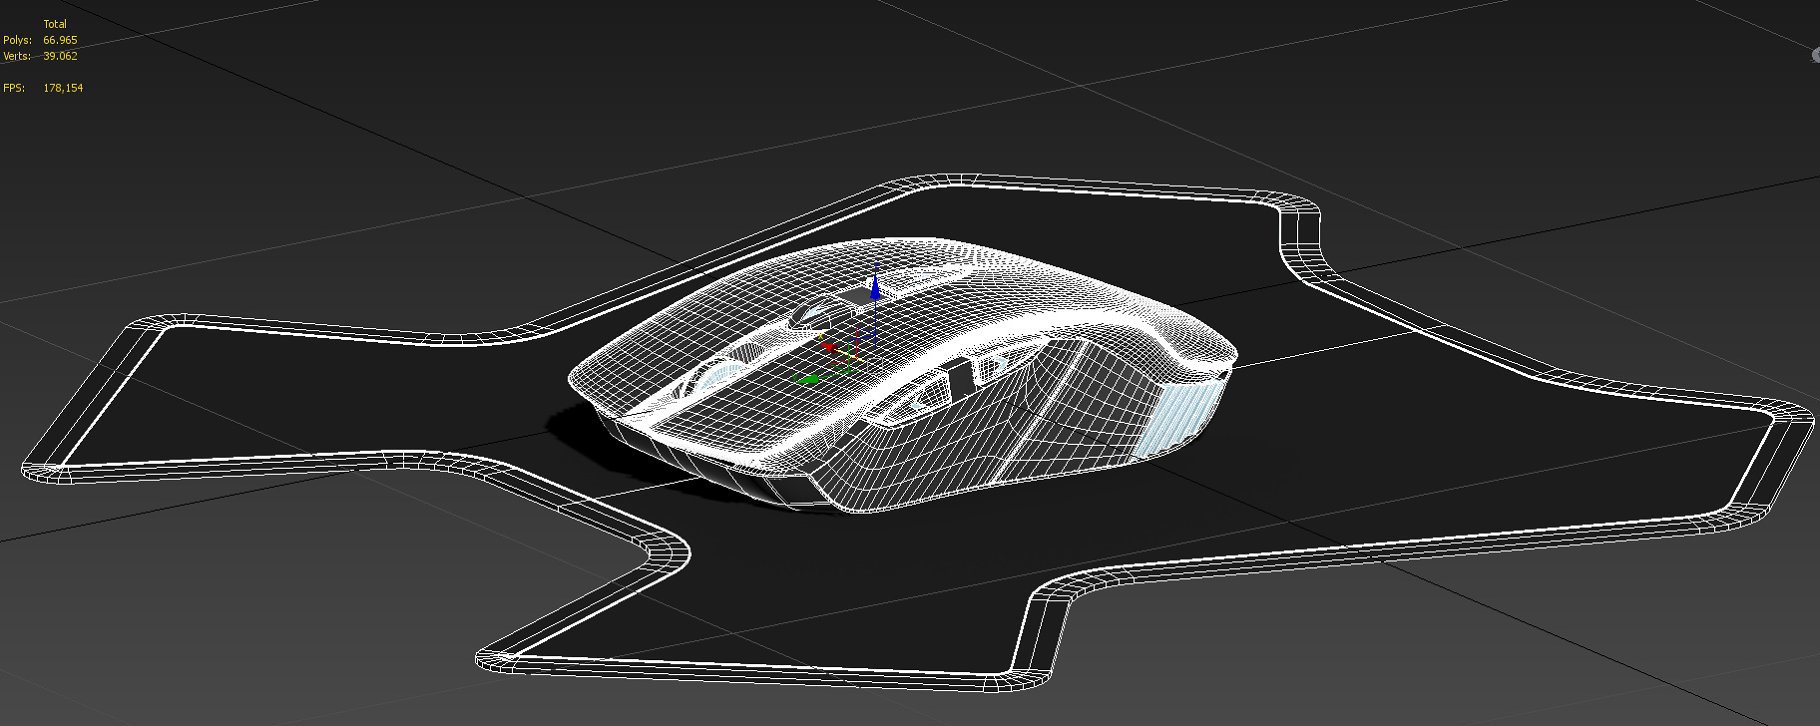 Images of a wonderful 3d model of a gaming mouse